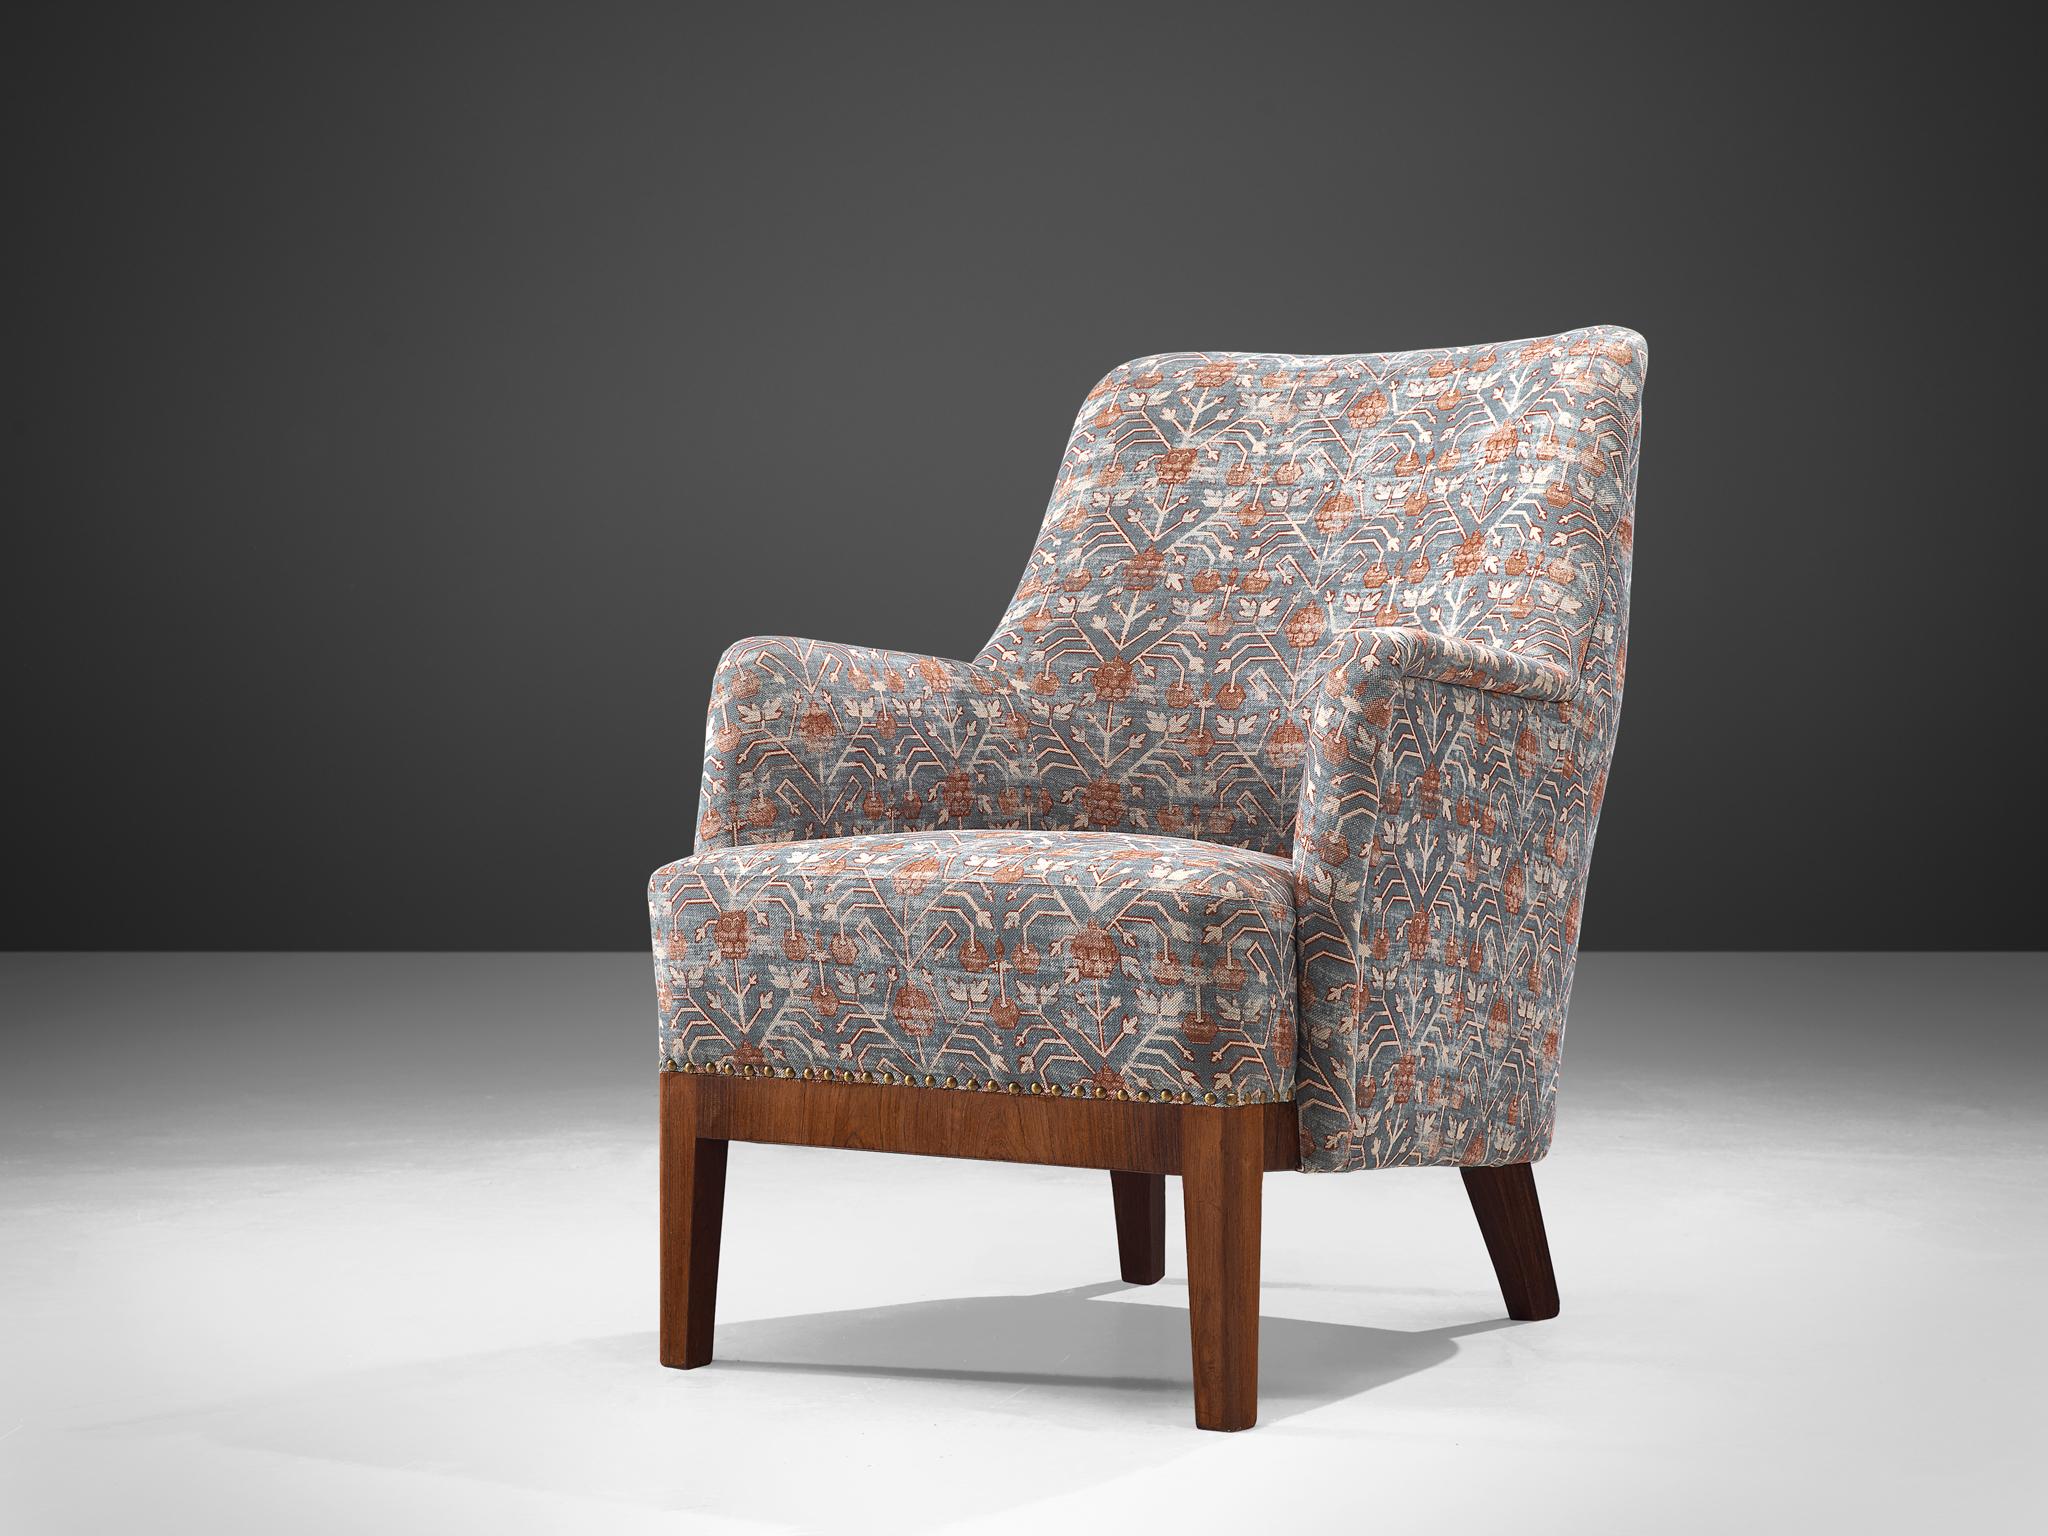 Armchair, fabric and rosewood, Denmark, 1960s.
This classic highback armchair show refined Danish craftsmanship and aesthetics. The backs feature a slightly tilted back and comfortable upholstered seating and back, as can be expected from Danish